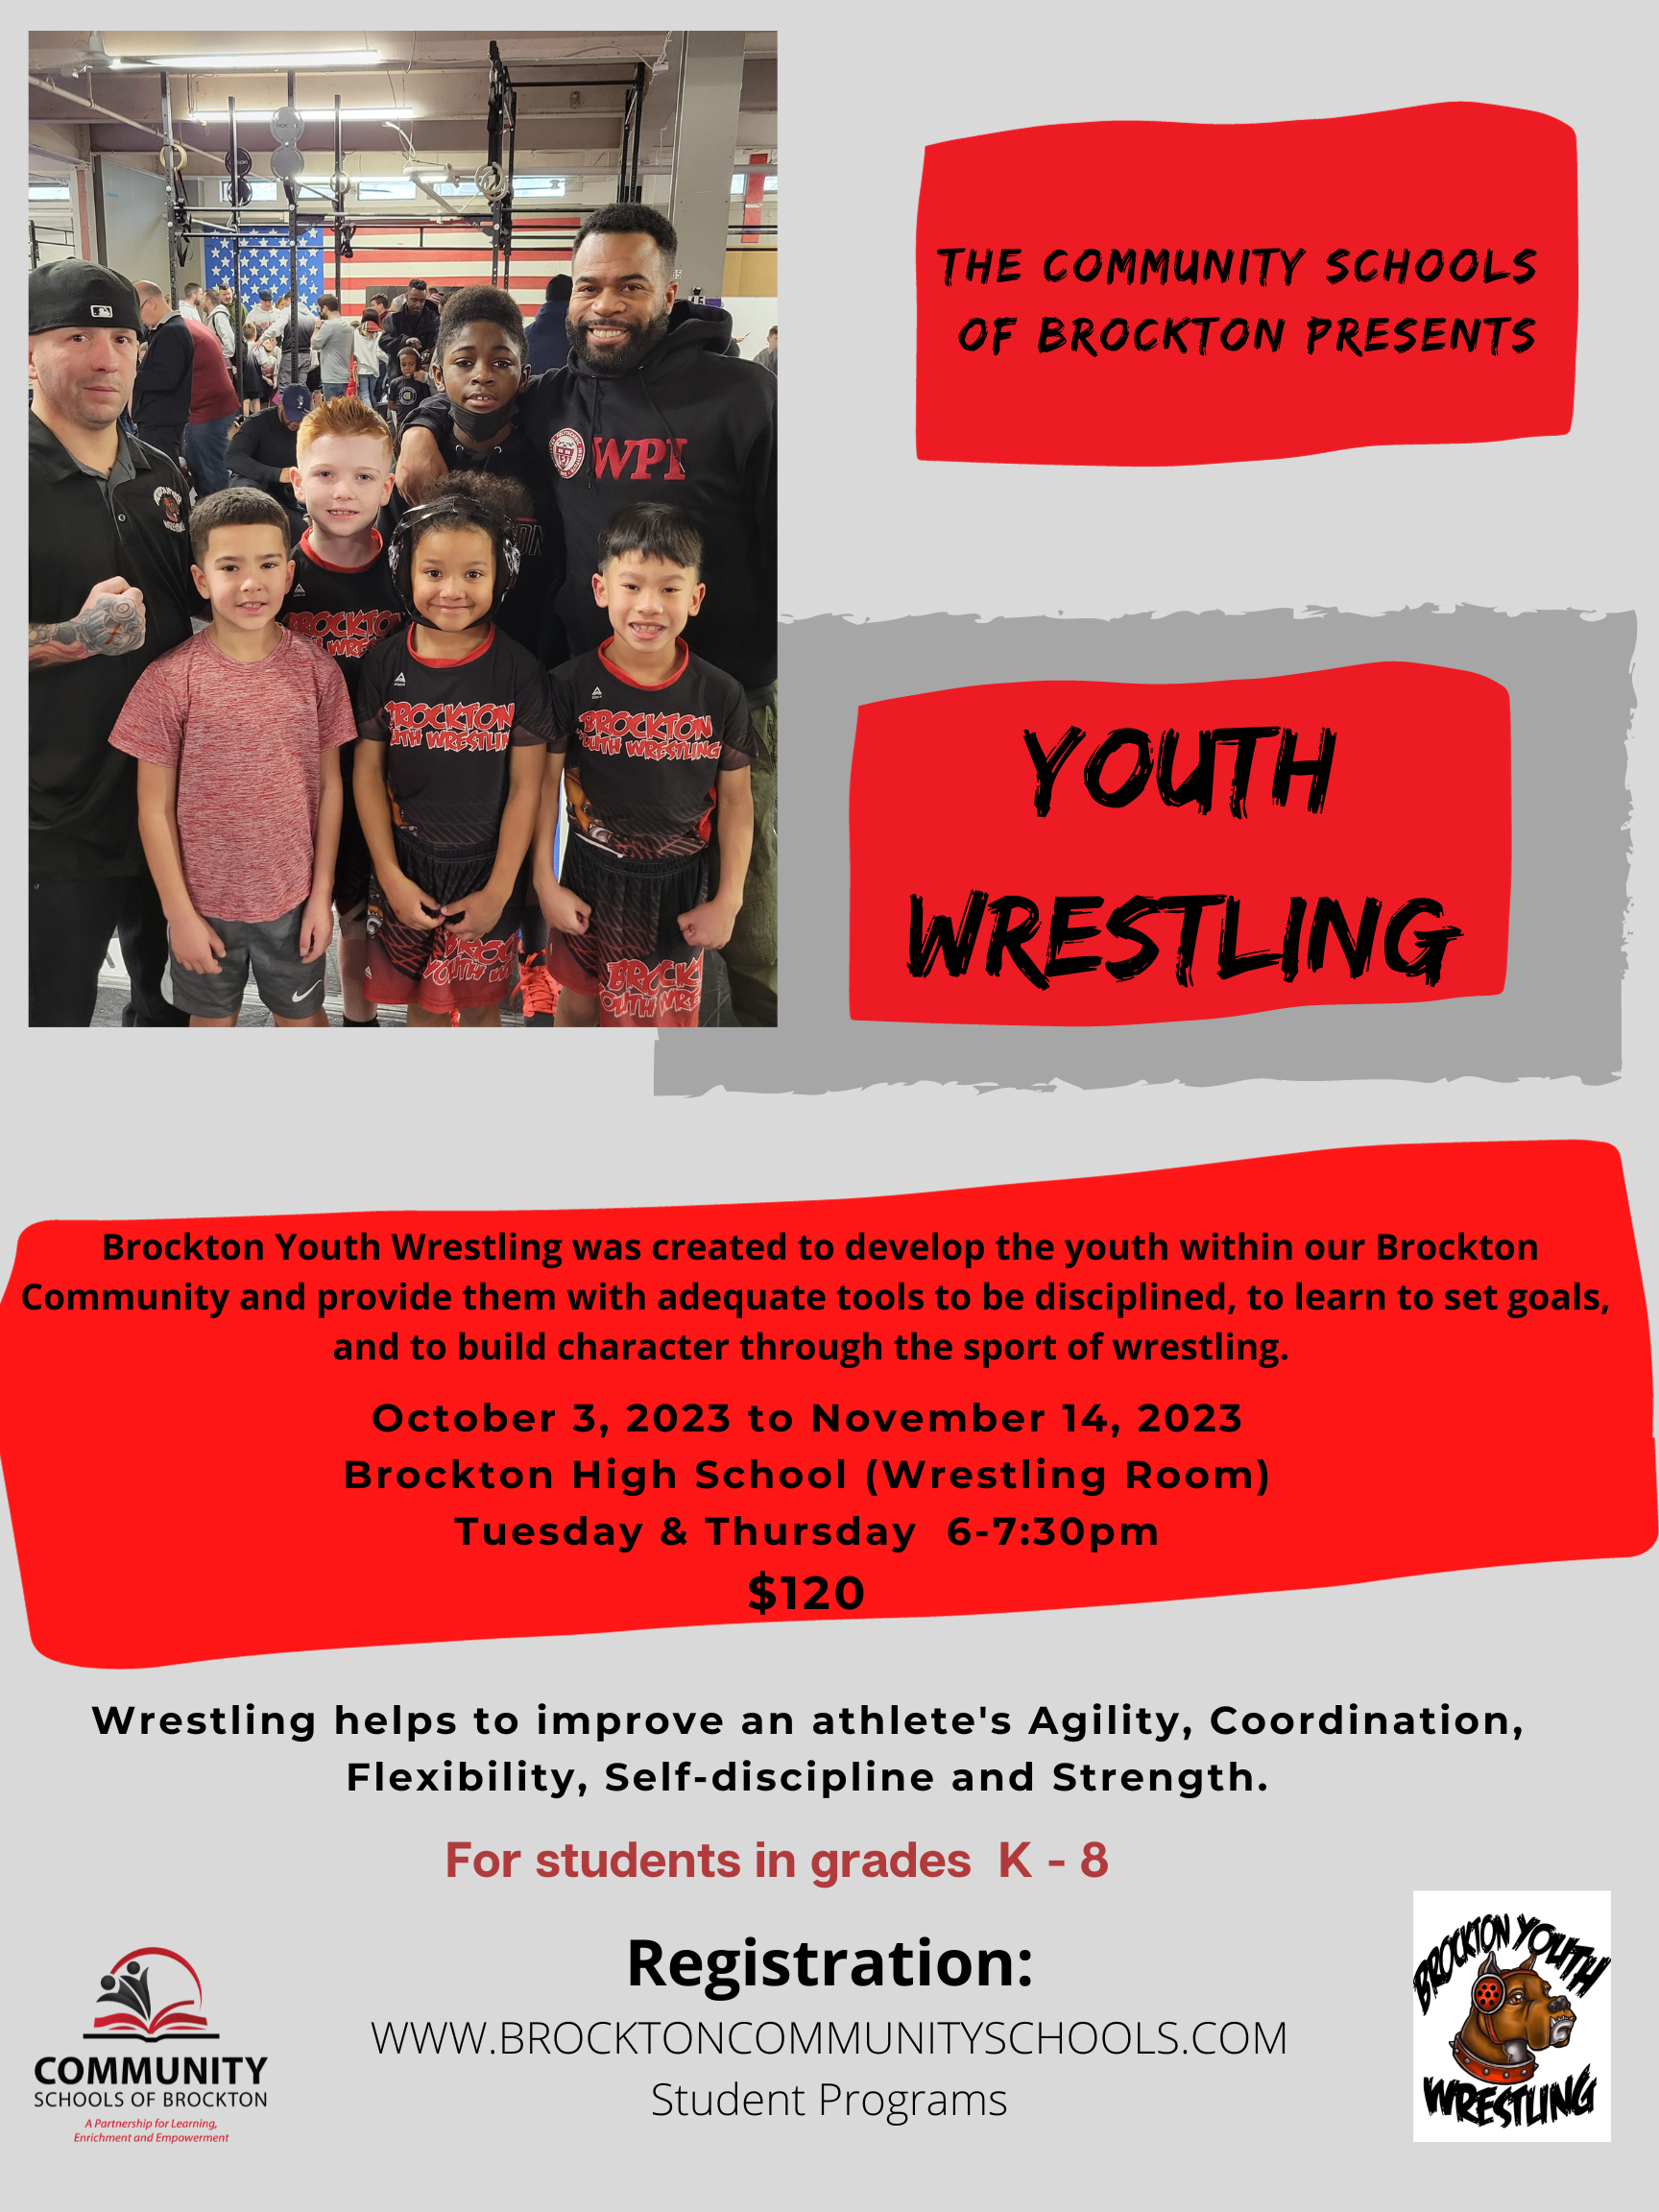 YOUTH WRESTLING (GR K8 AT BHS) Classes in Brockton, MA STUDENT 2023